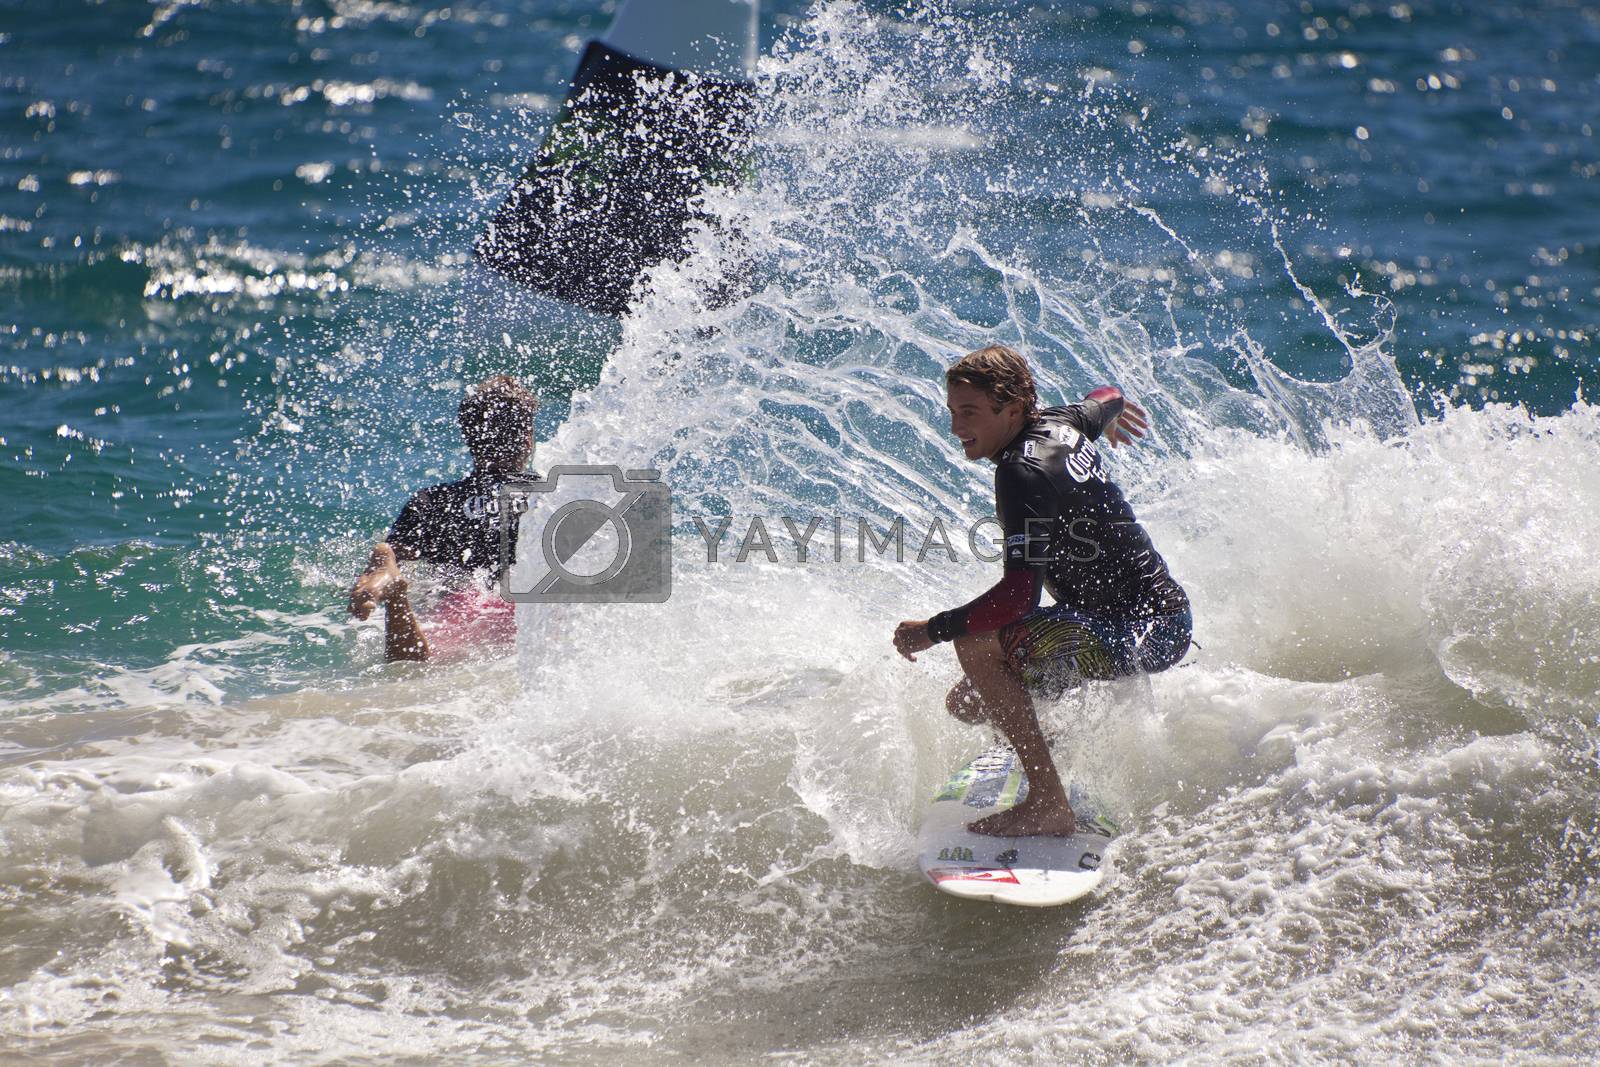 Royalty free image of Surfing by Imagecom